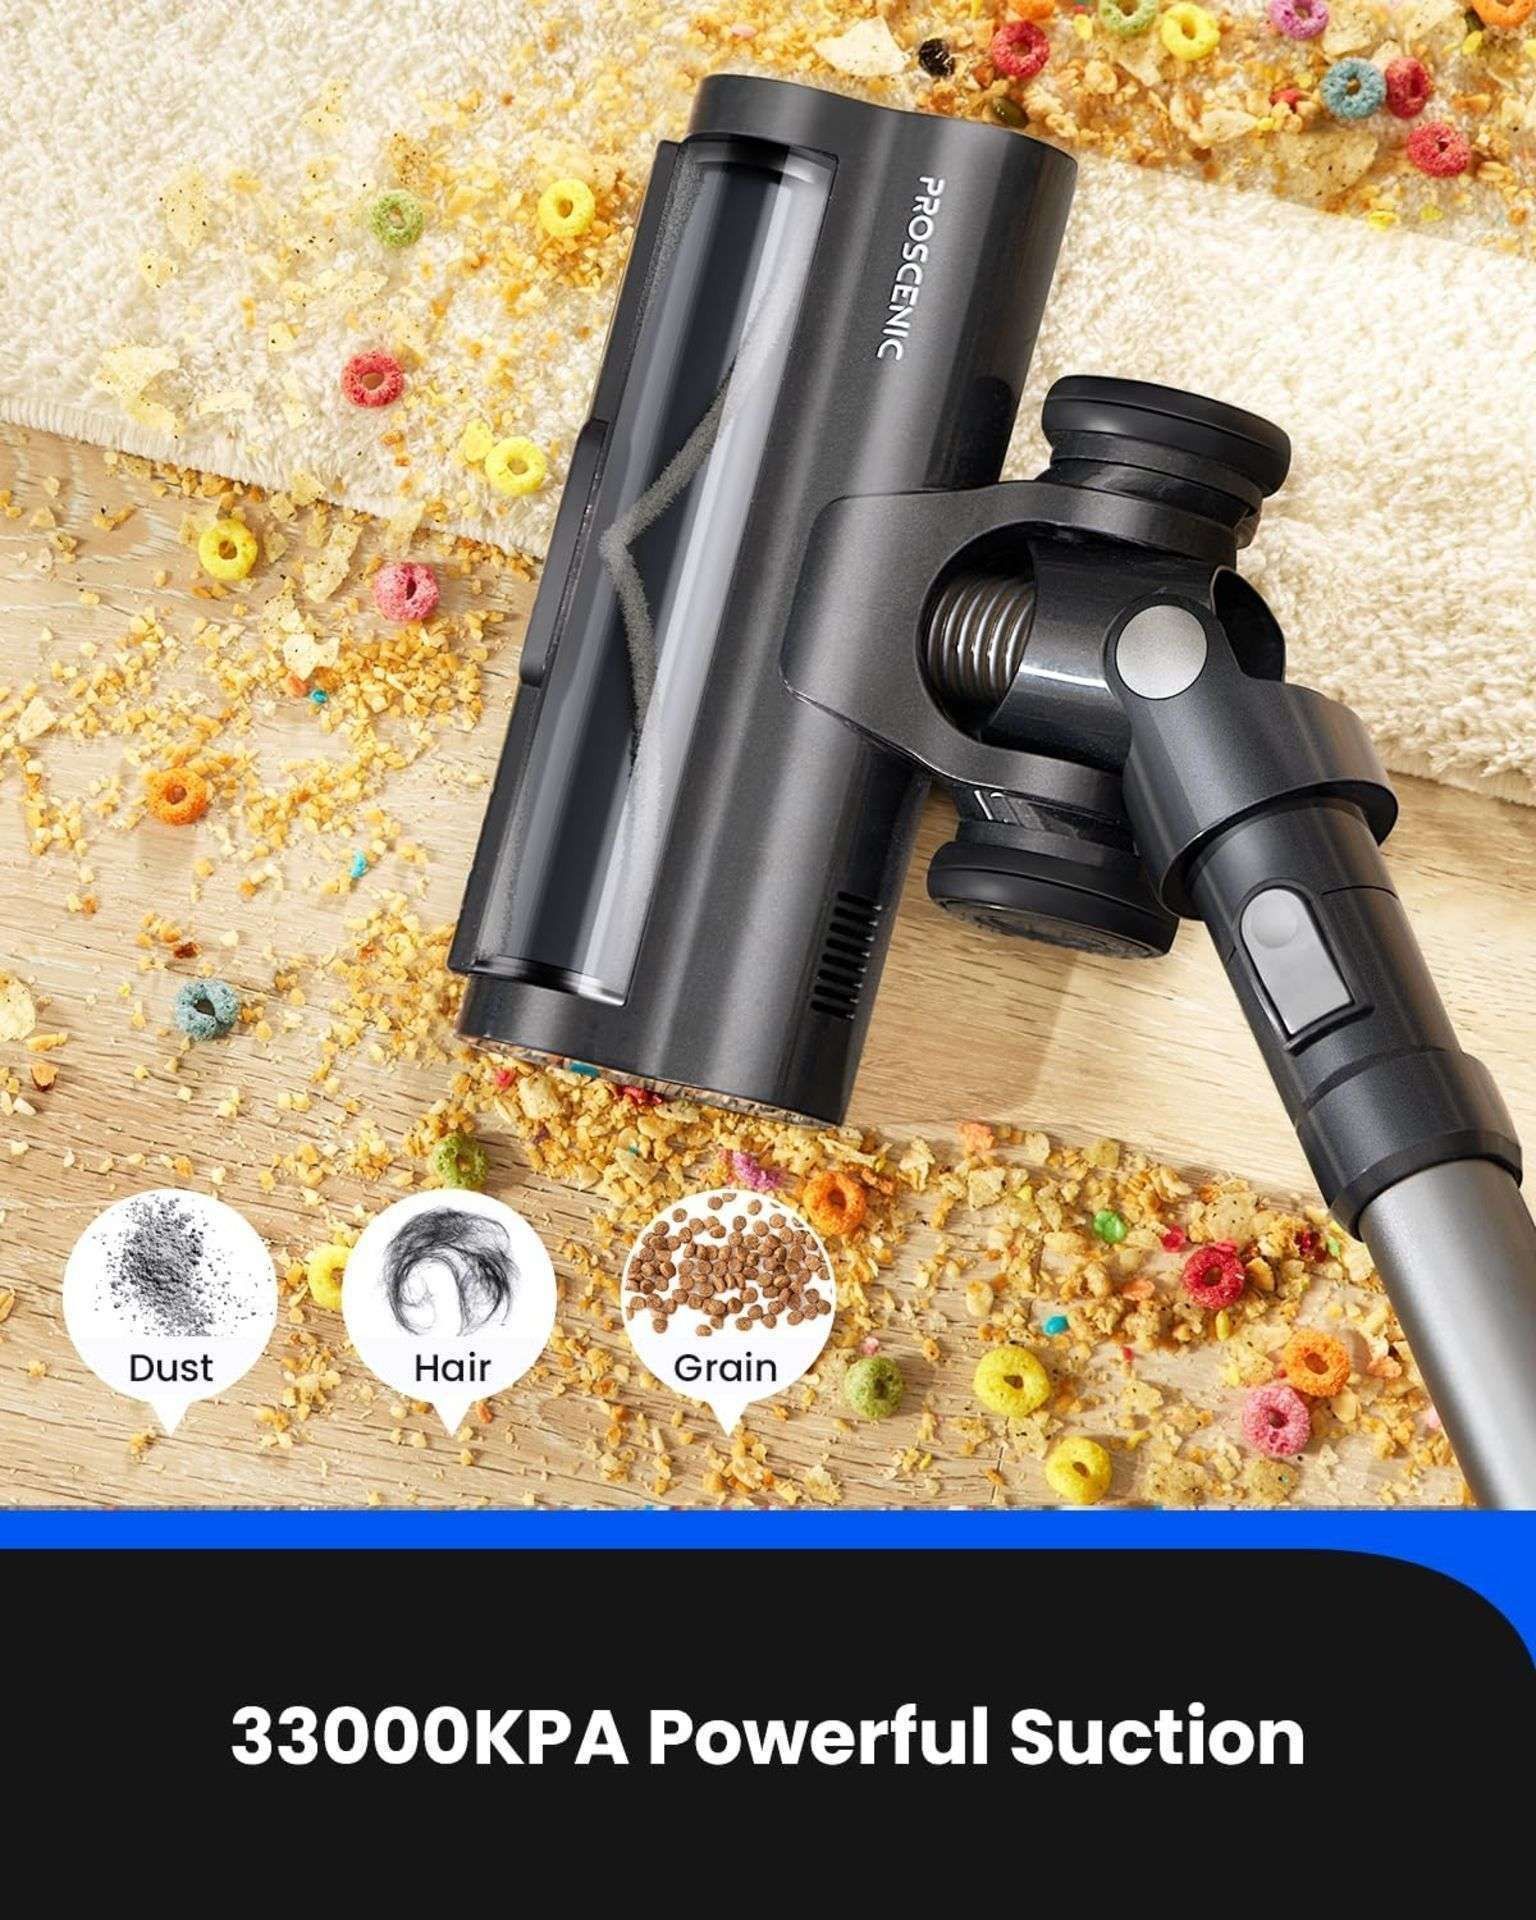 New & Boxed Proscenic P12 Cordless Vacuum Cleaner, 33Kpa Stick Vacuum Cleaner with Touch Display, - Image 4 of 9